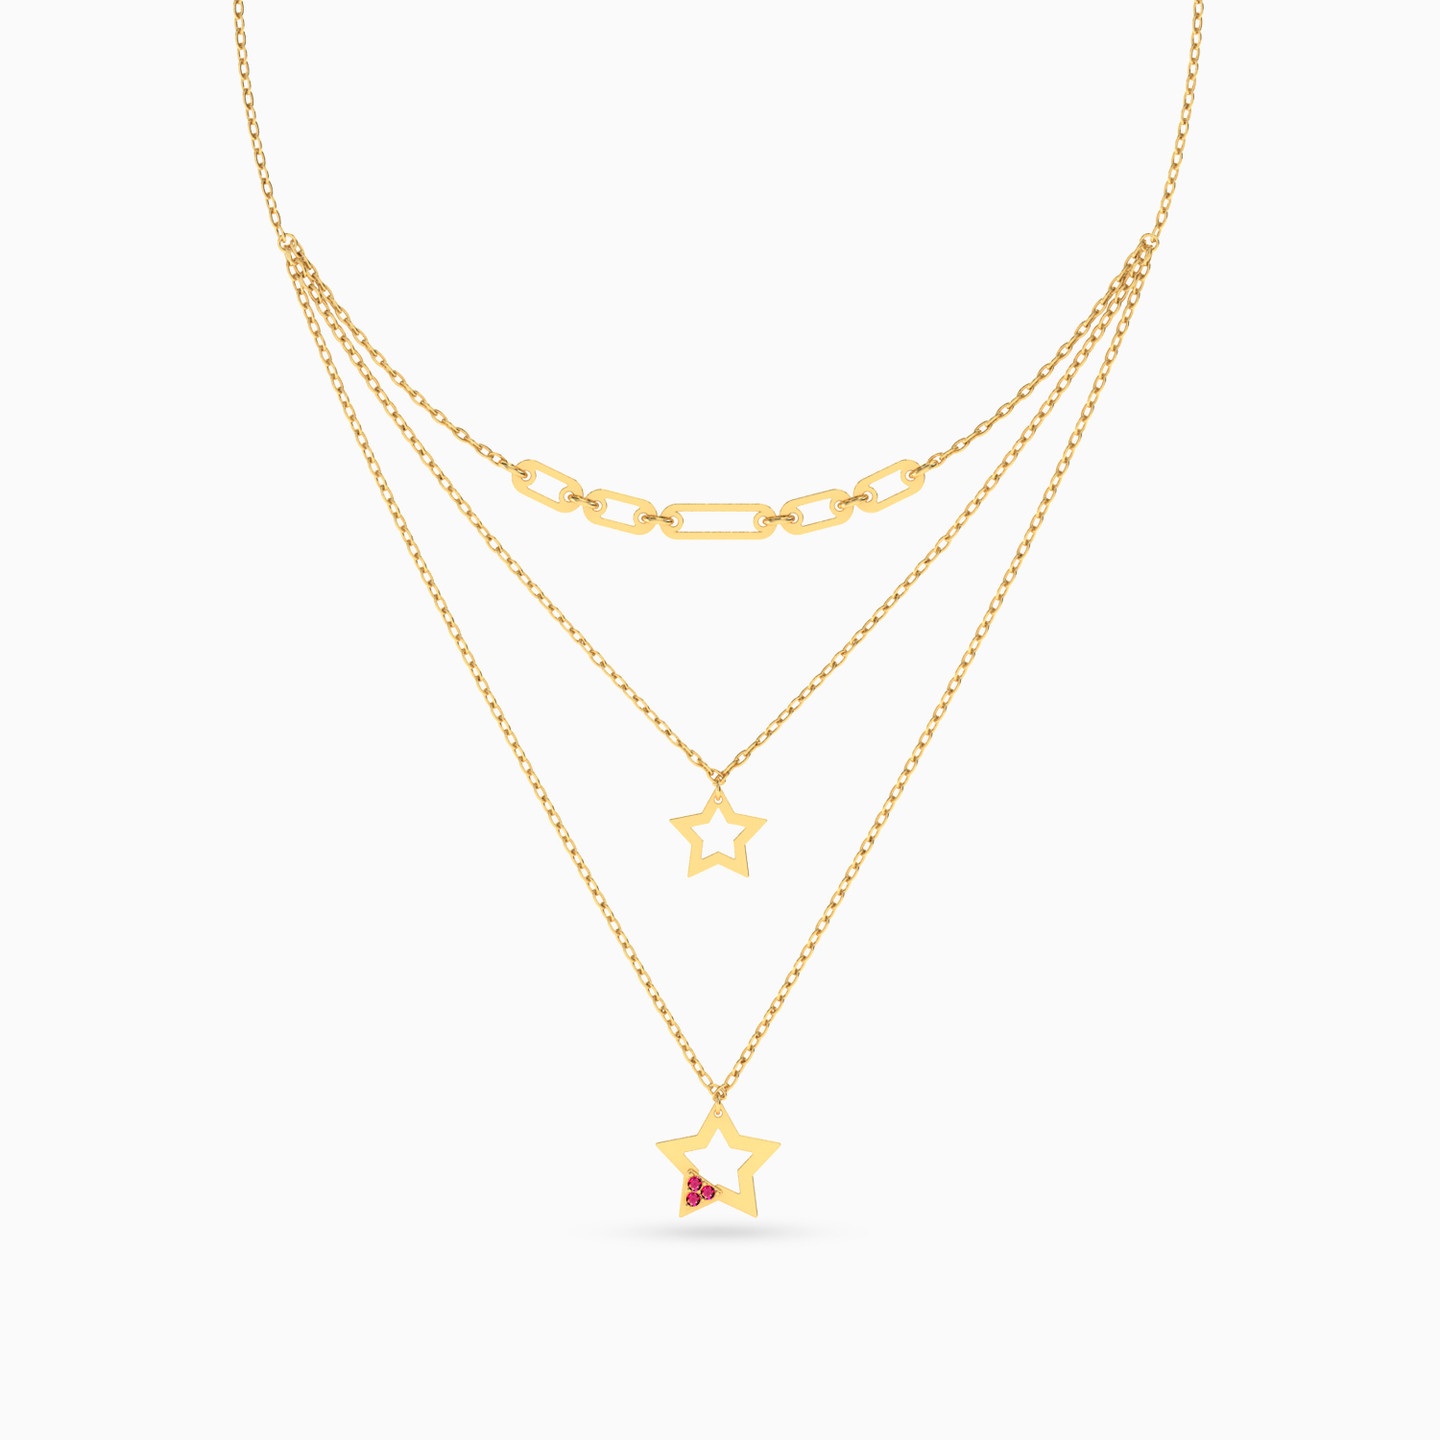 18K Gold Colored Stones Layered Necklace - 3